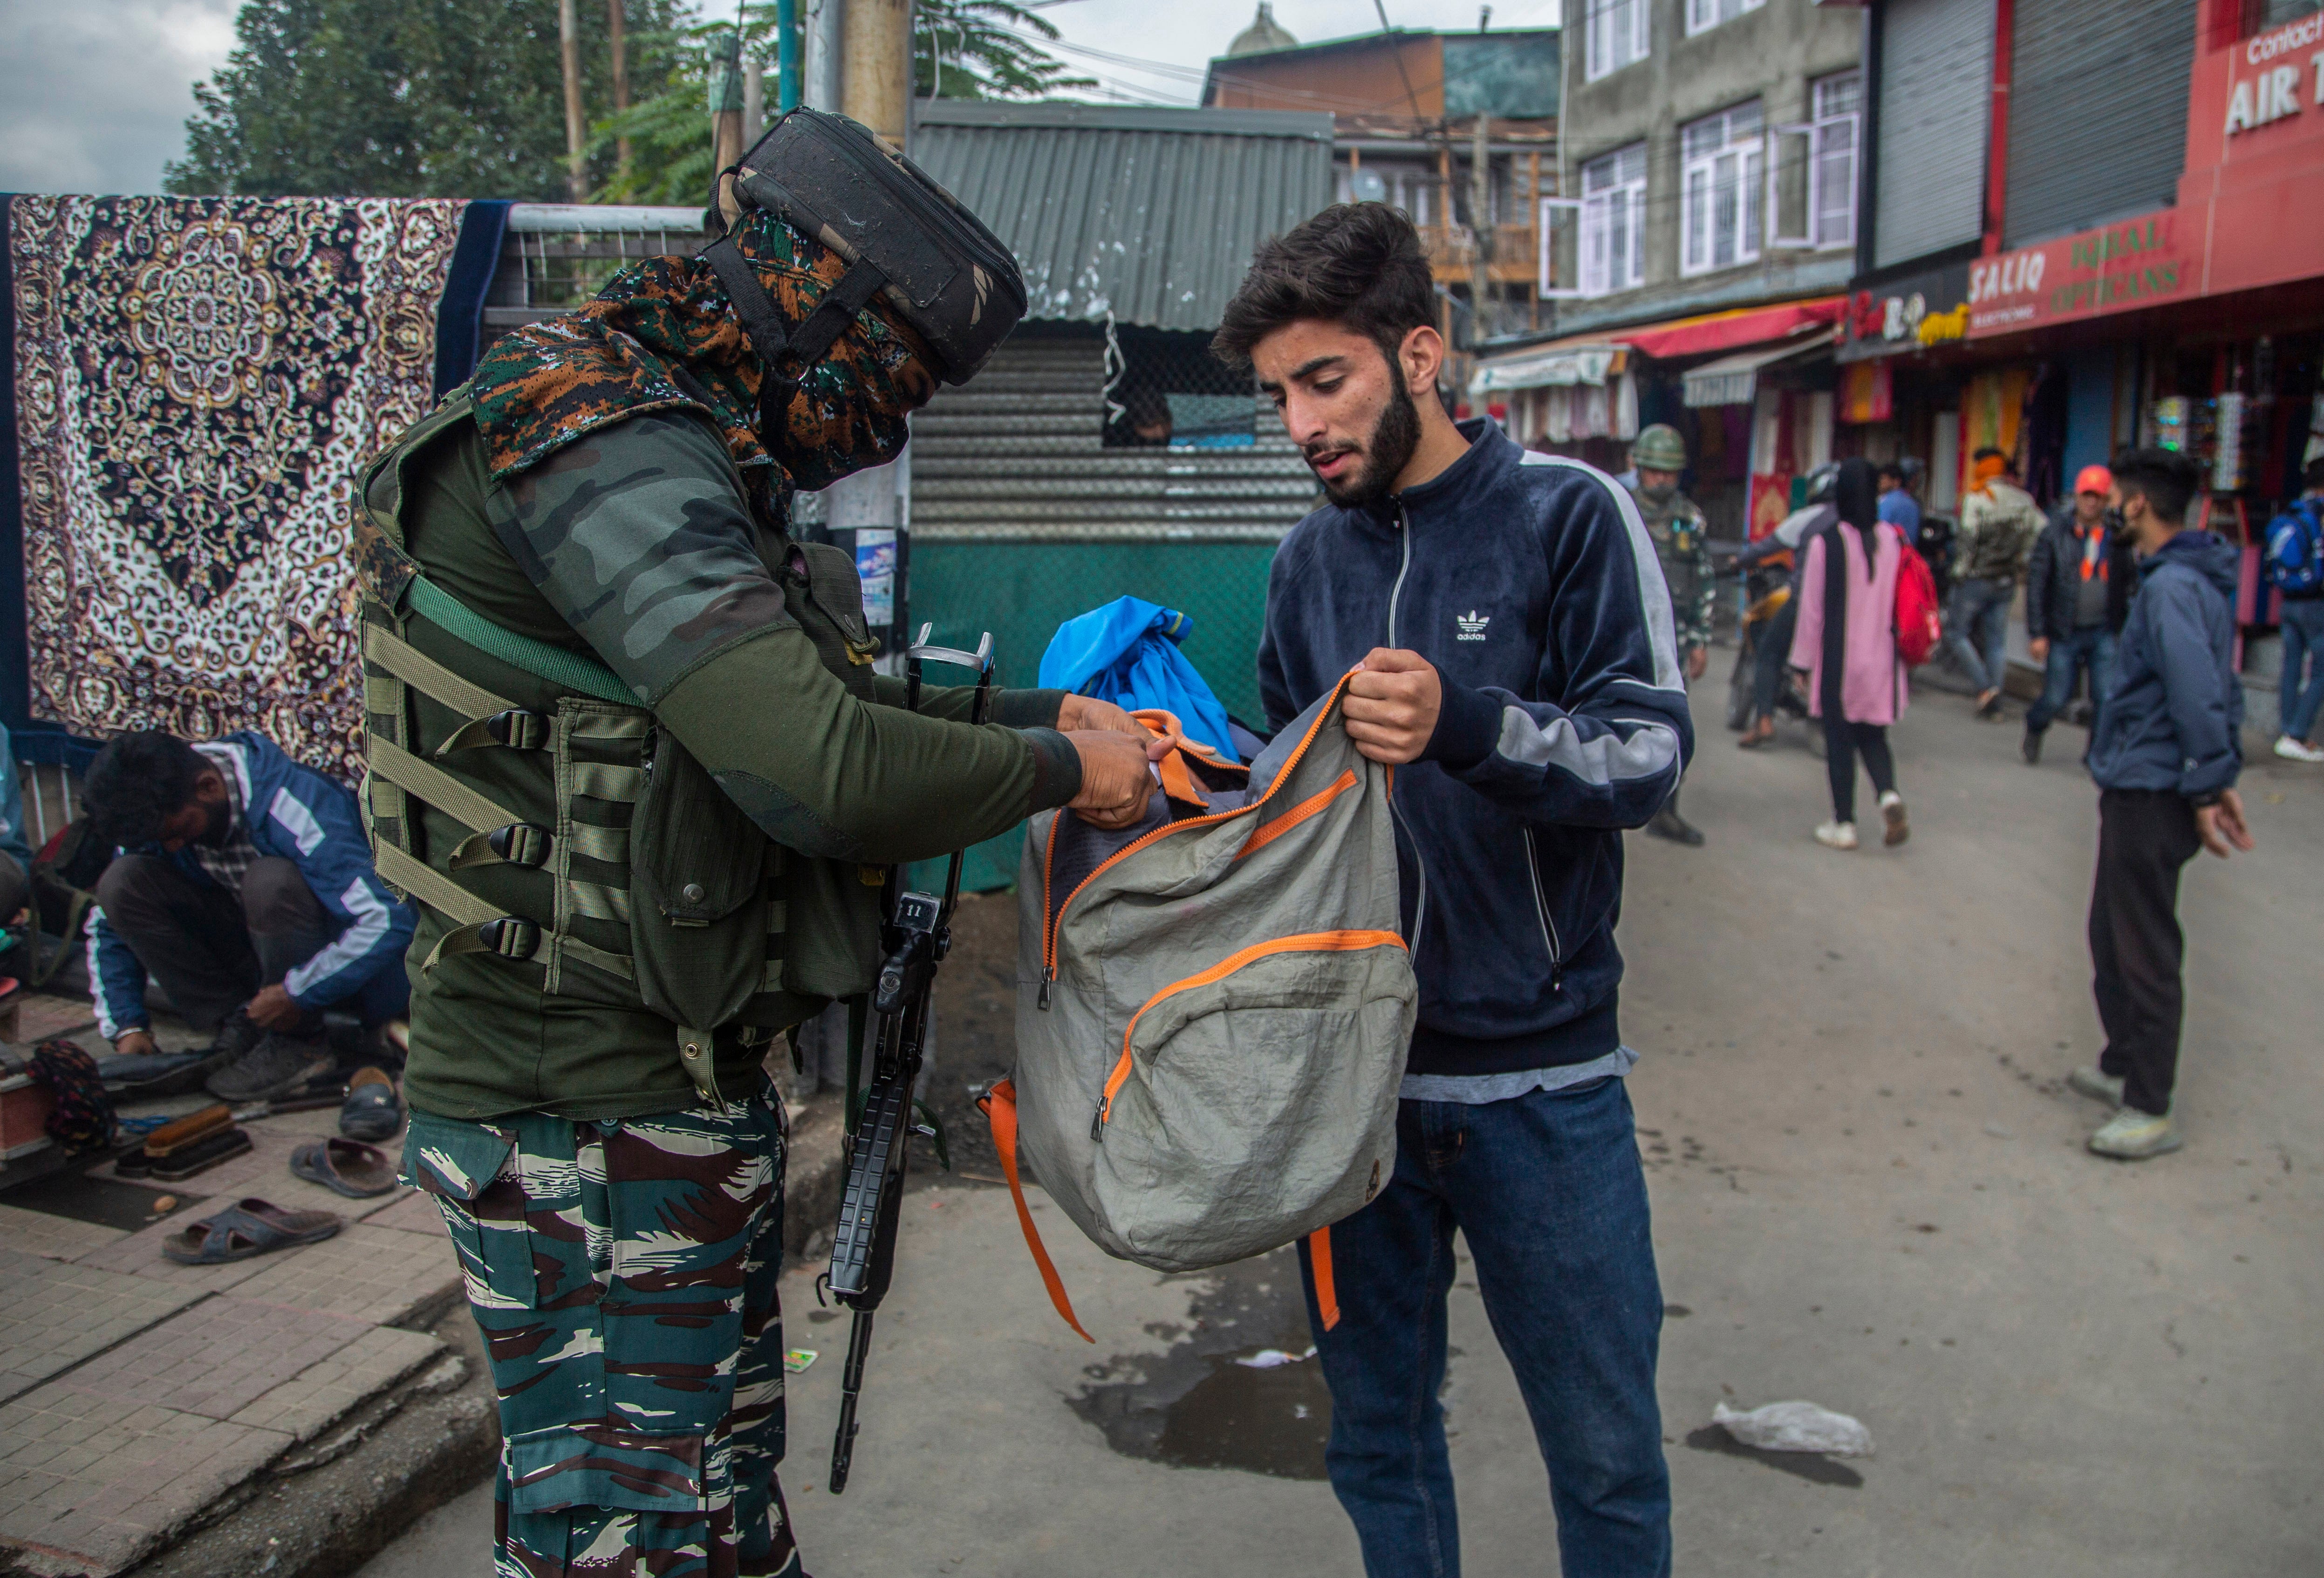 Indian paramilitary soldier checks the bag of a Kashmiri man at a market in Indian administered Kashmir